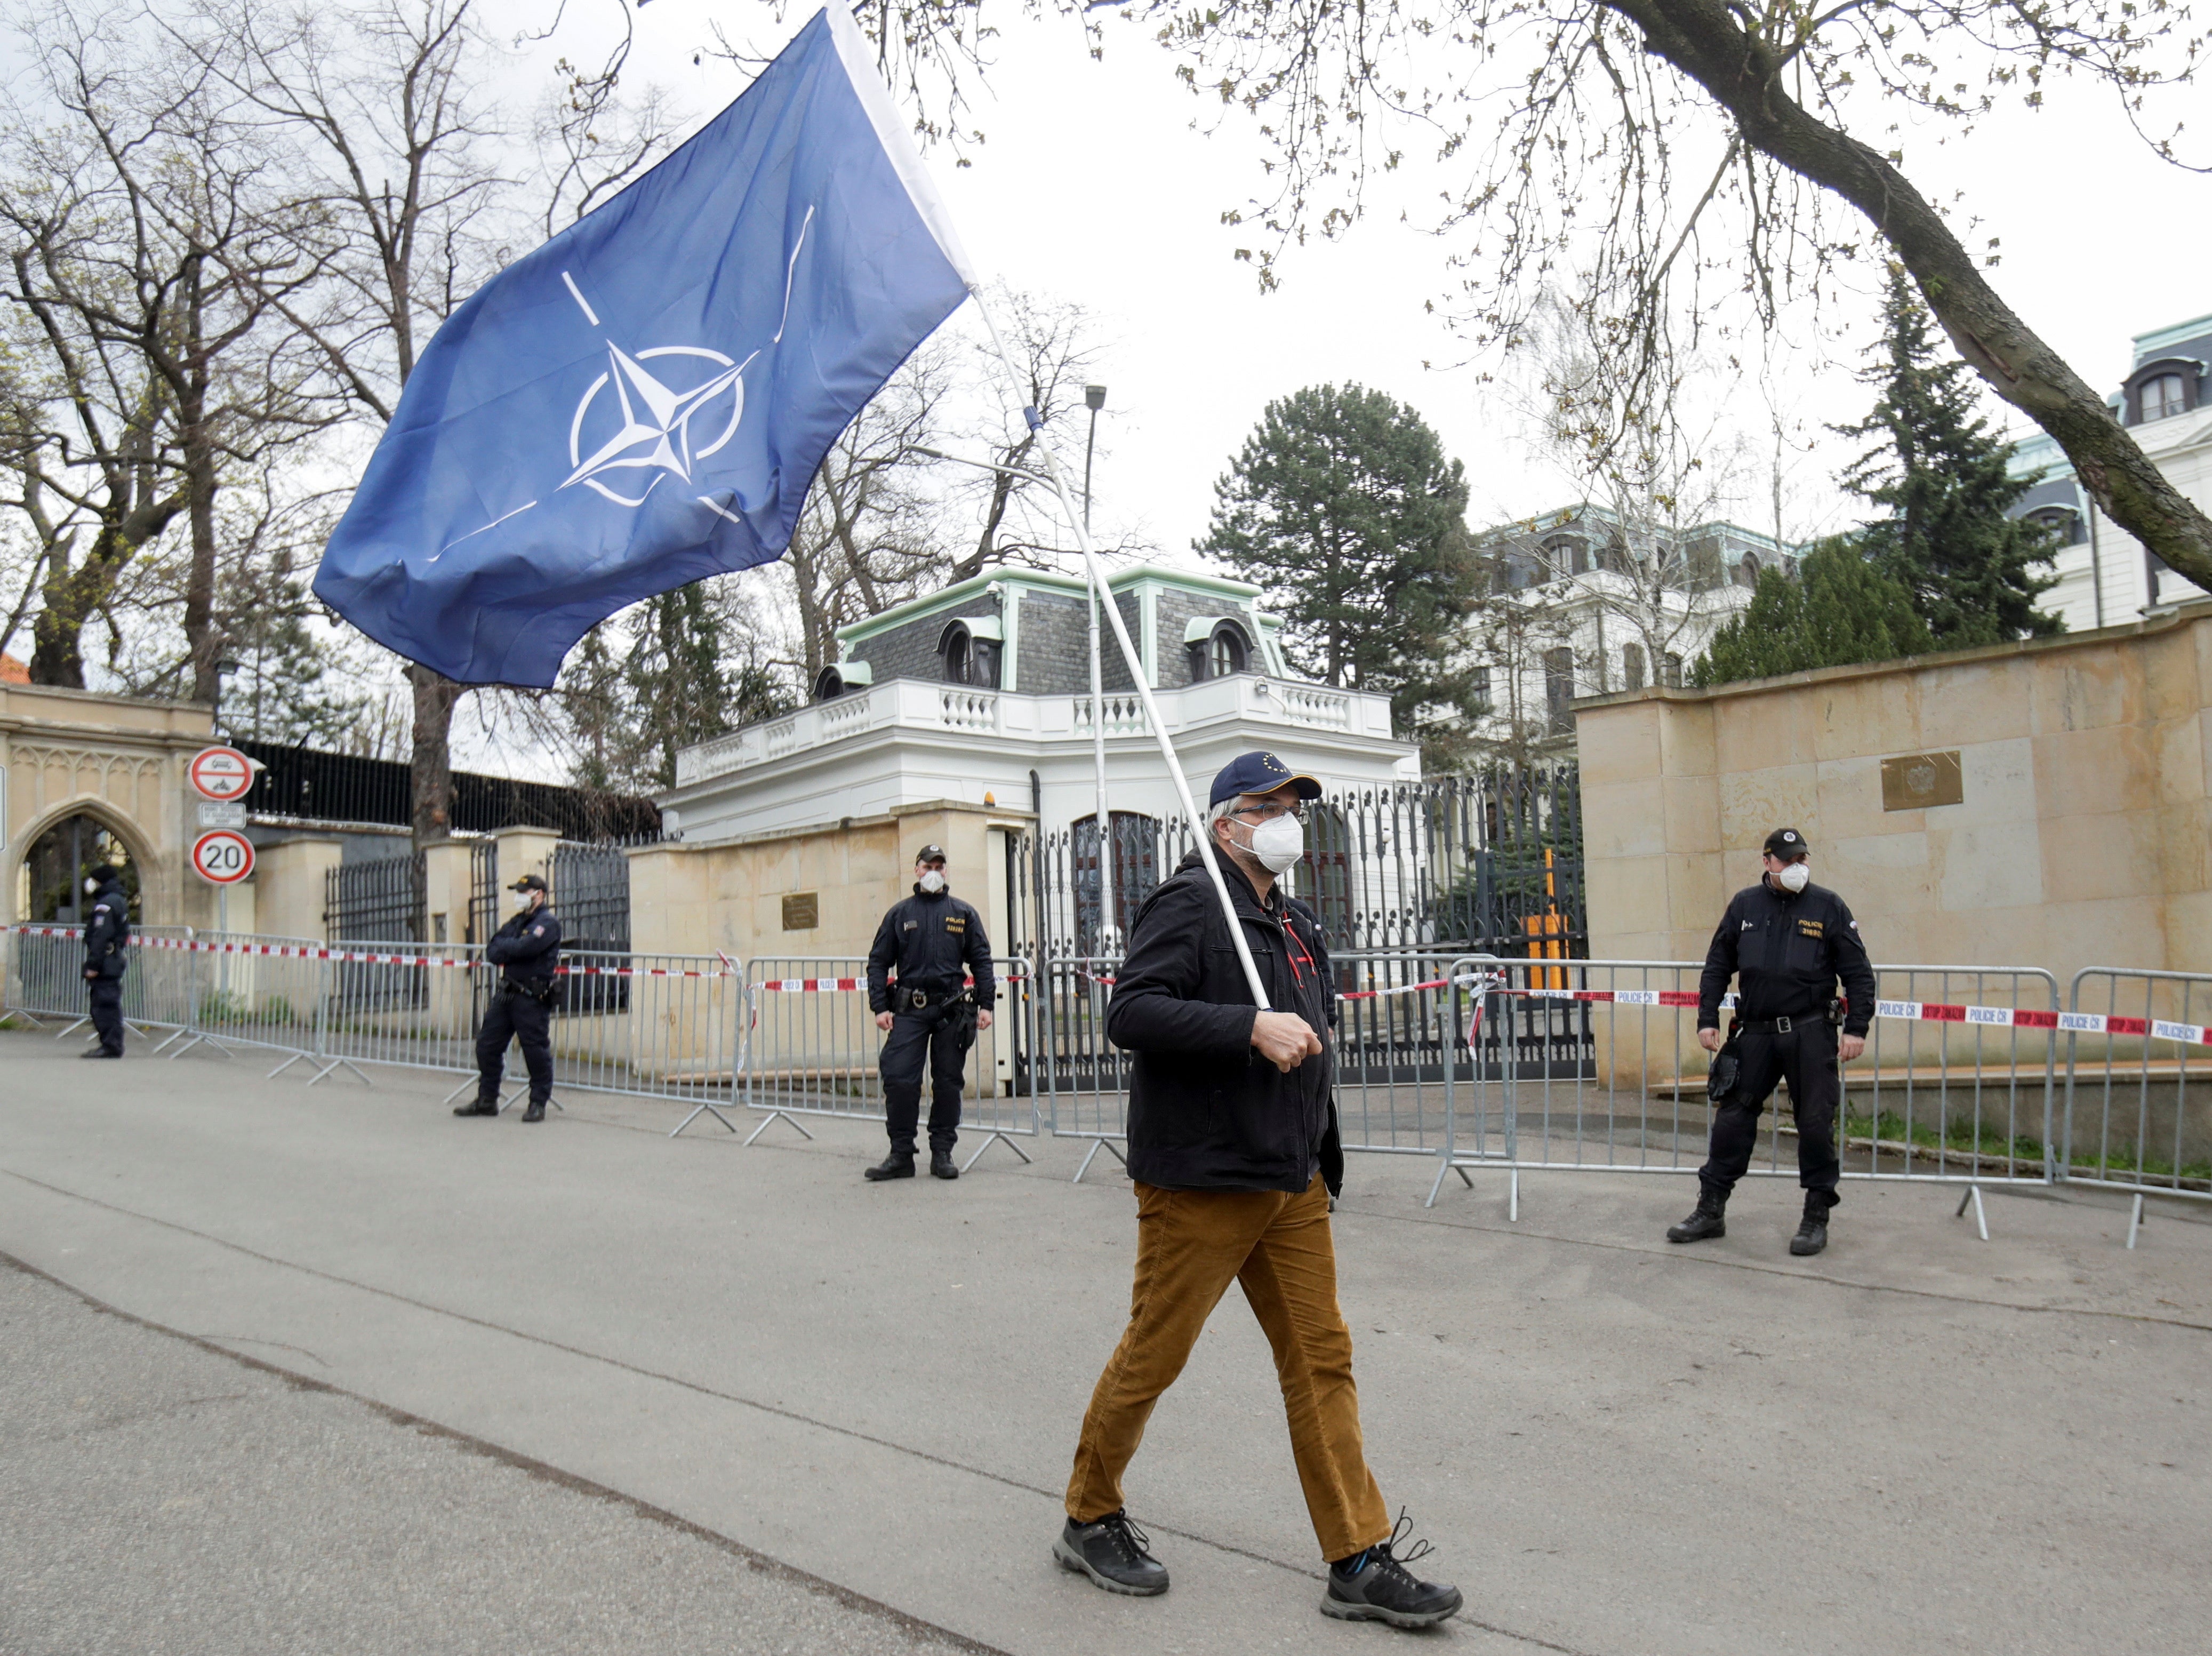 A man carrying a Nato flag to protest over Russian intelligence services’ alleged involvement in an ammunition depot explosion in the Vrbetice area in 2014 walks past police officers outside the Russian embassy in Prague, 18 April 2021